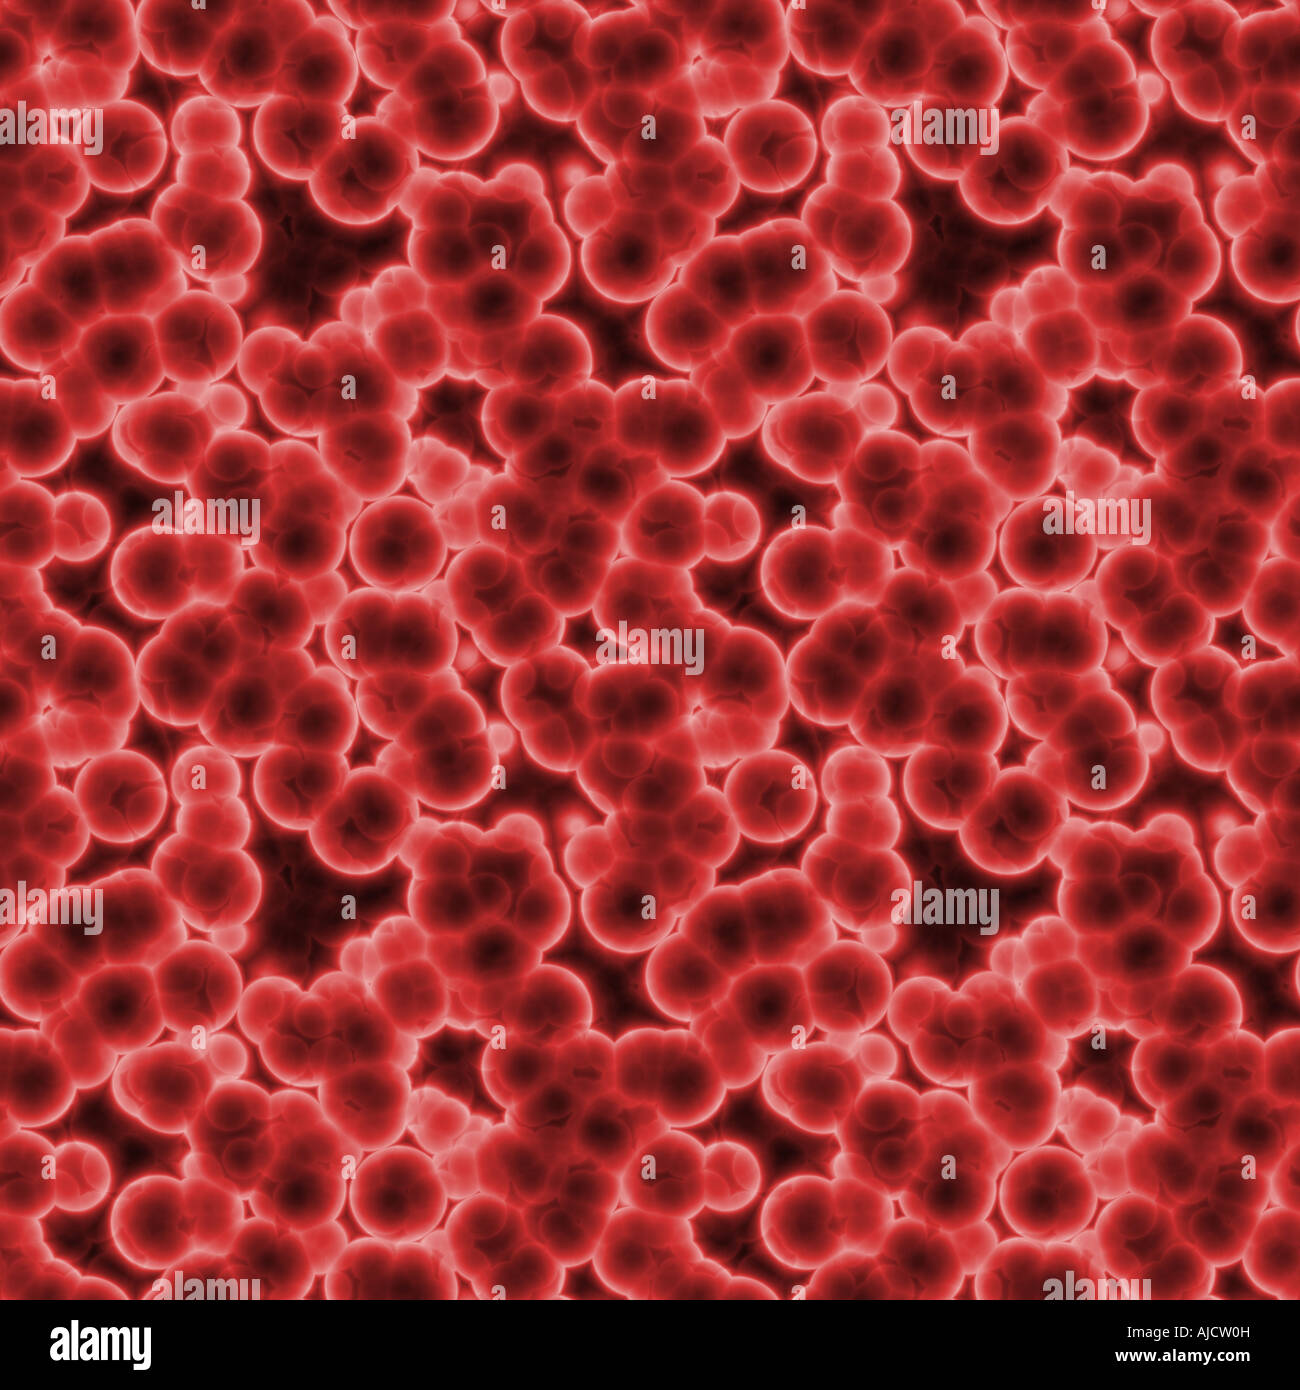 a large rendered image of bacteria or cells under a microscope Stock Photo